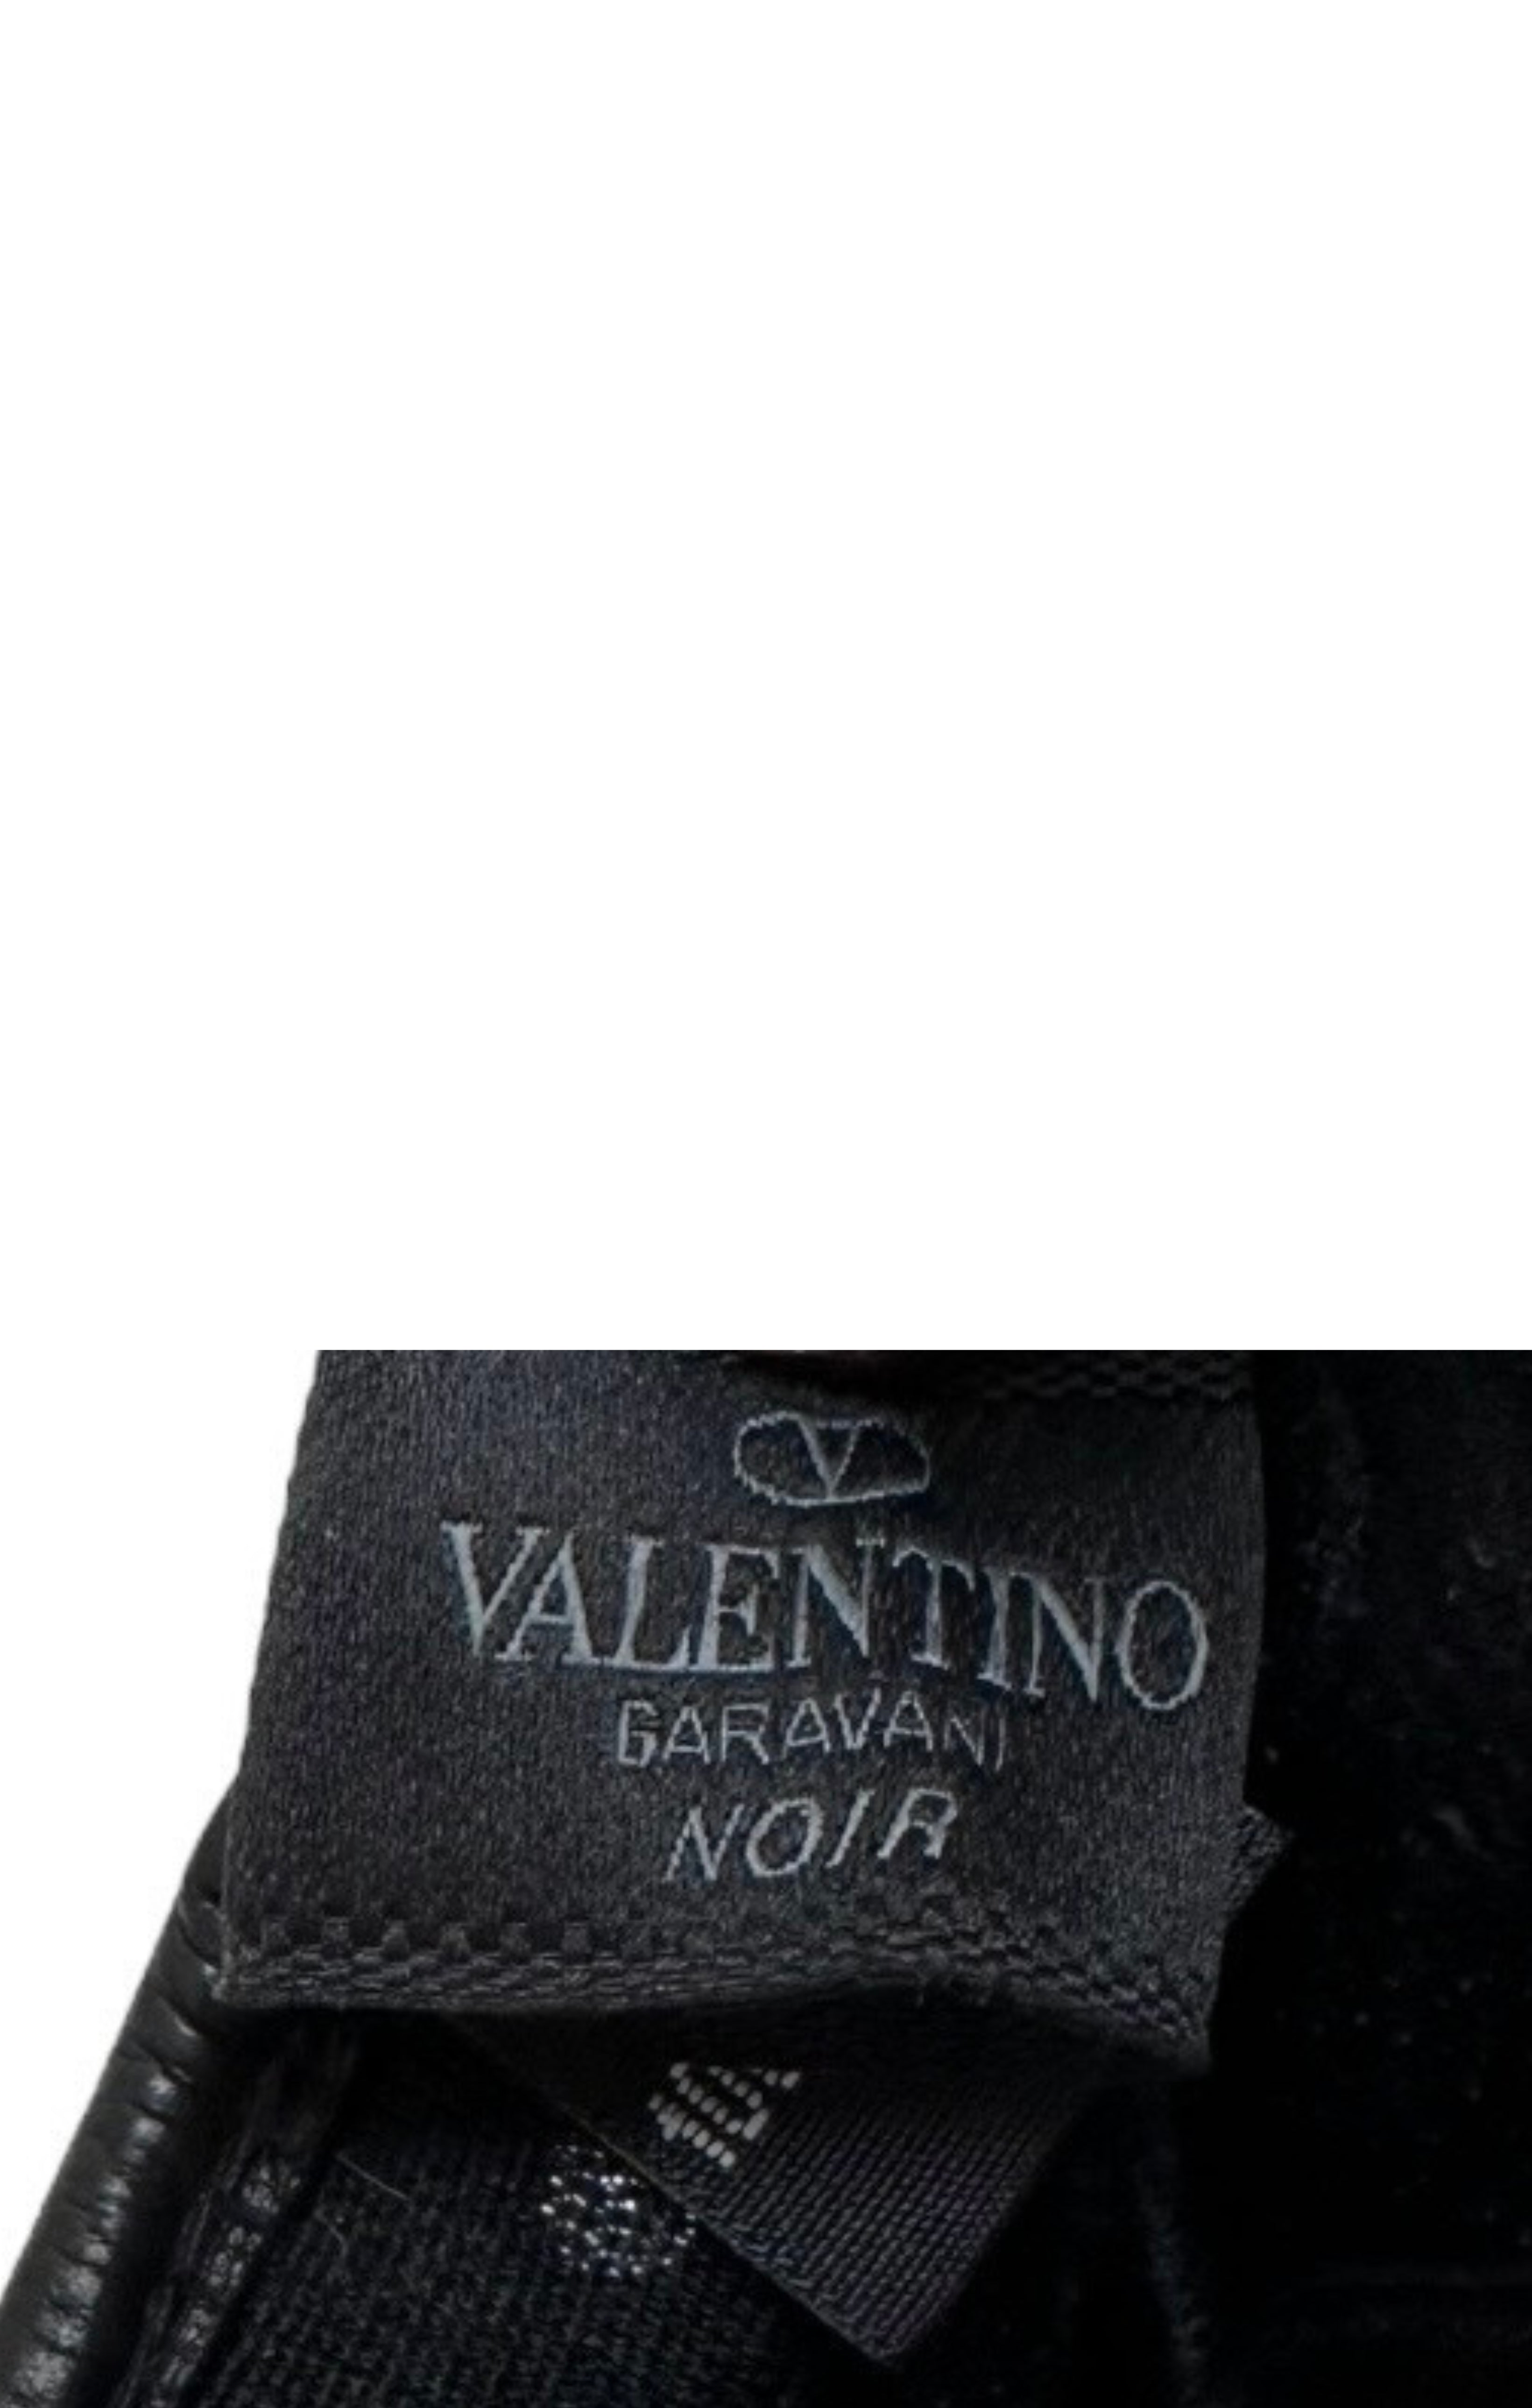 VALENTINO (RARE) Gloves Size: 8 / Fit like M